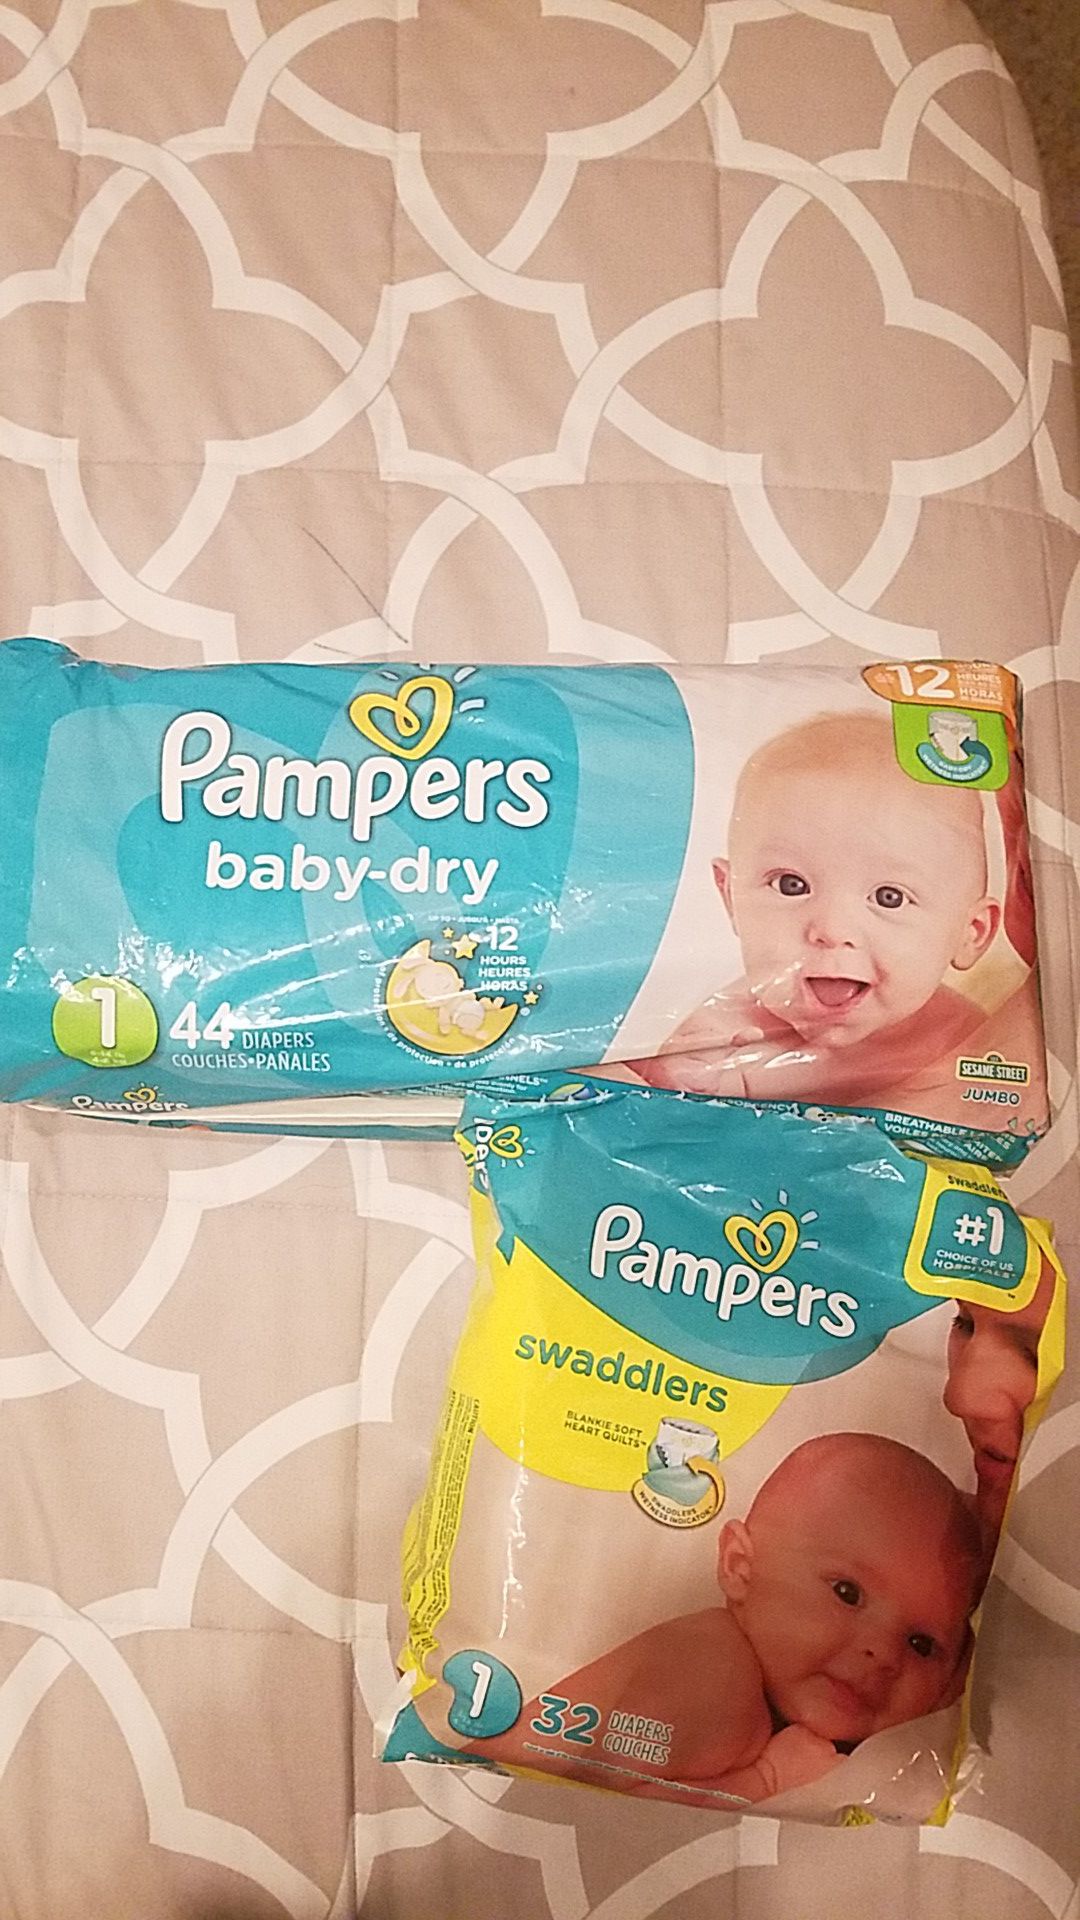 Pampers biapers size 1